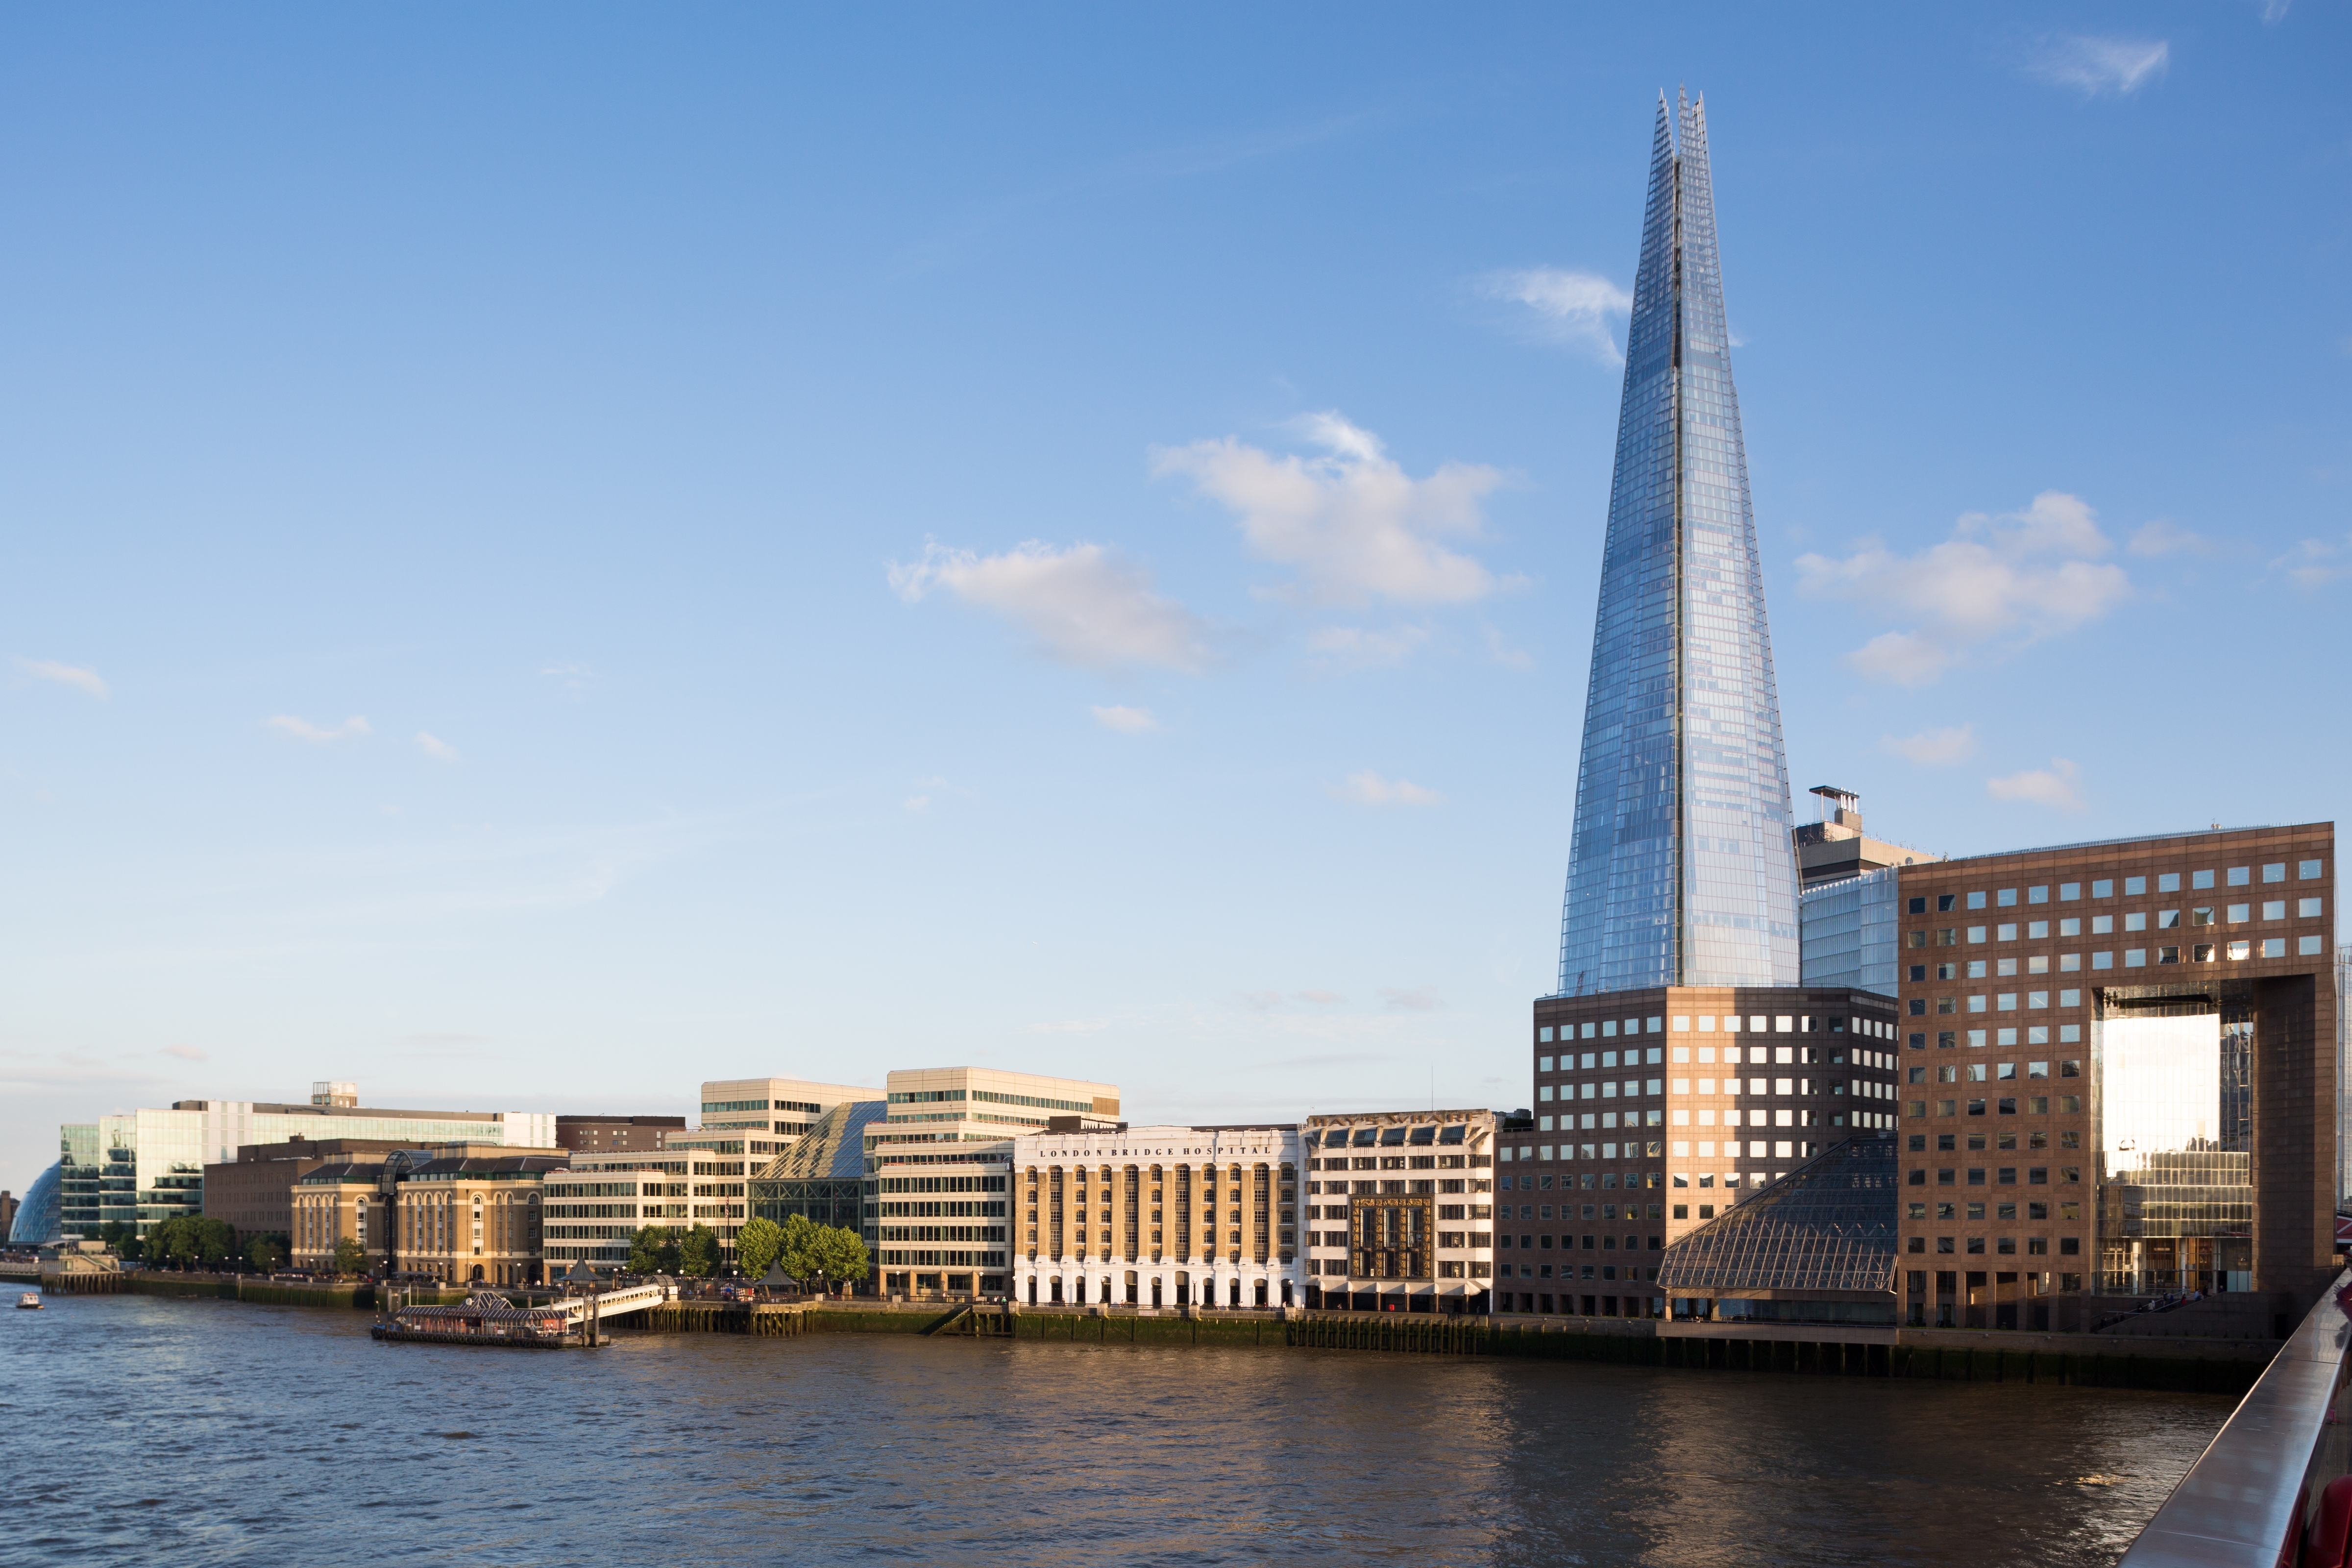 Eat, Drink and Shop on the Thames | London Bridge City